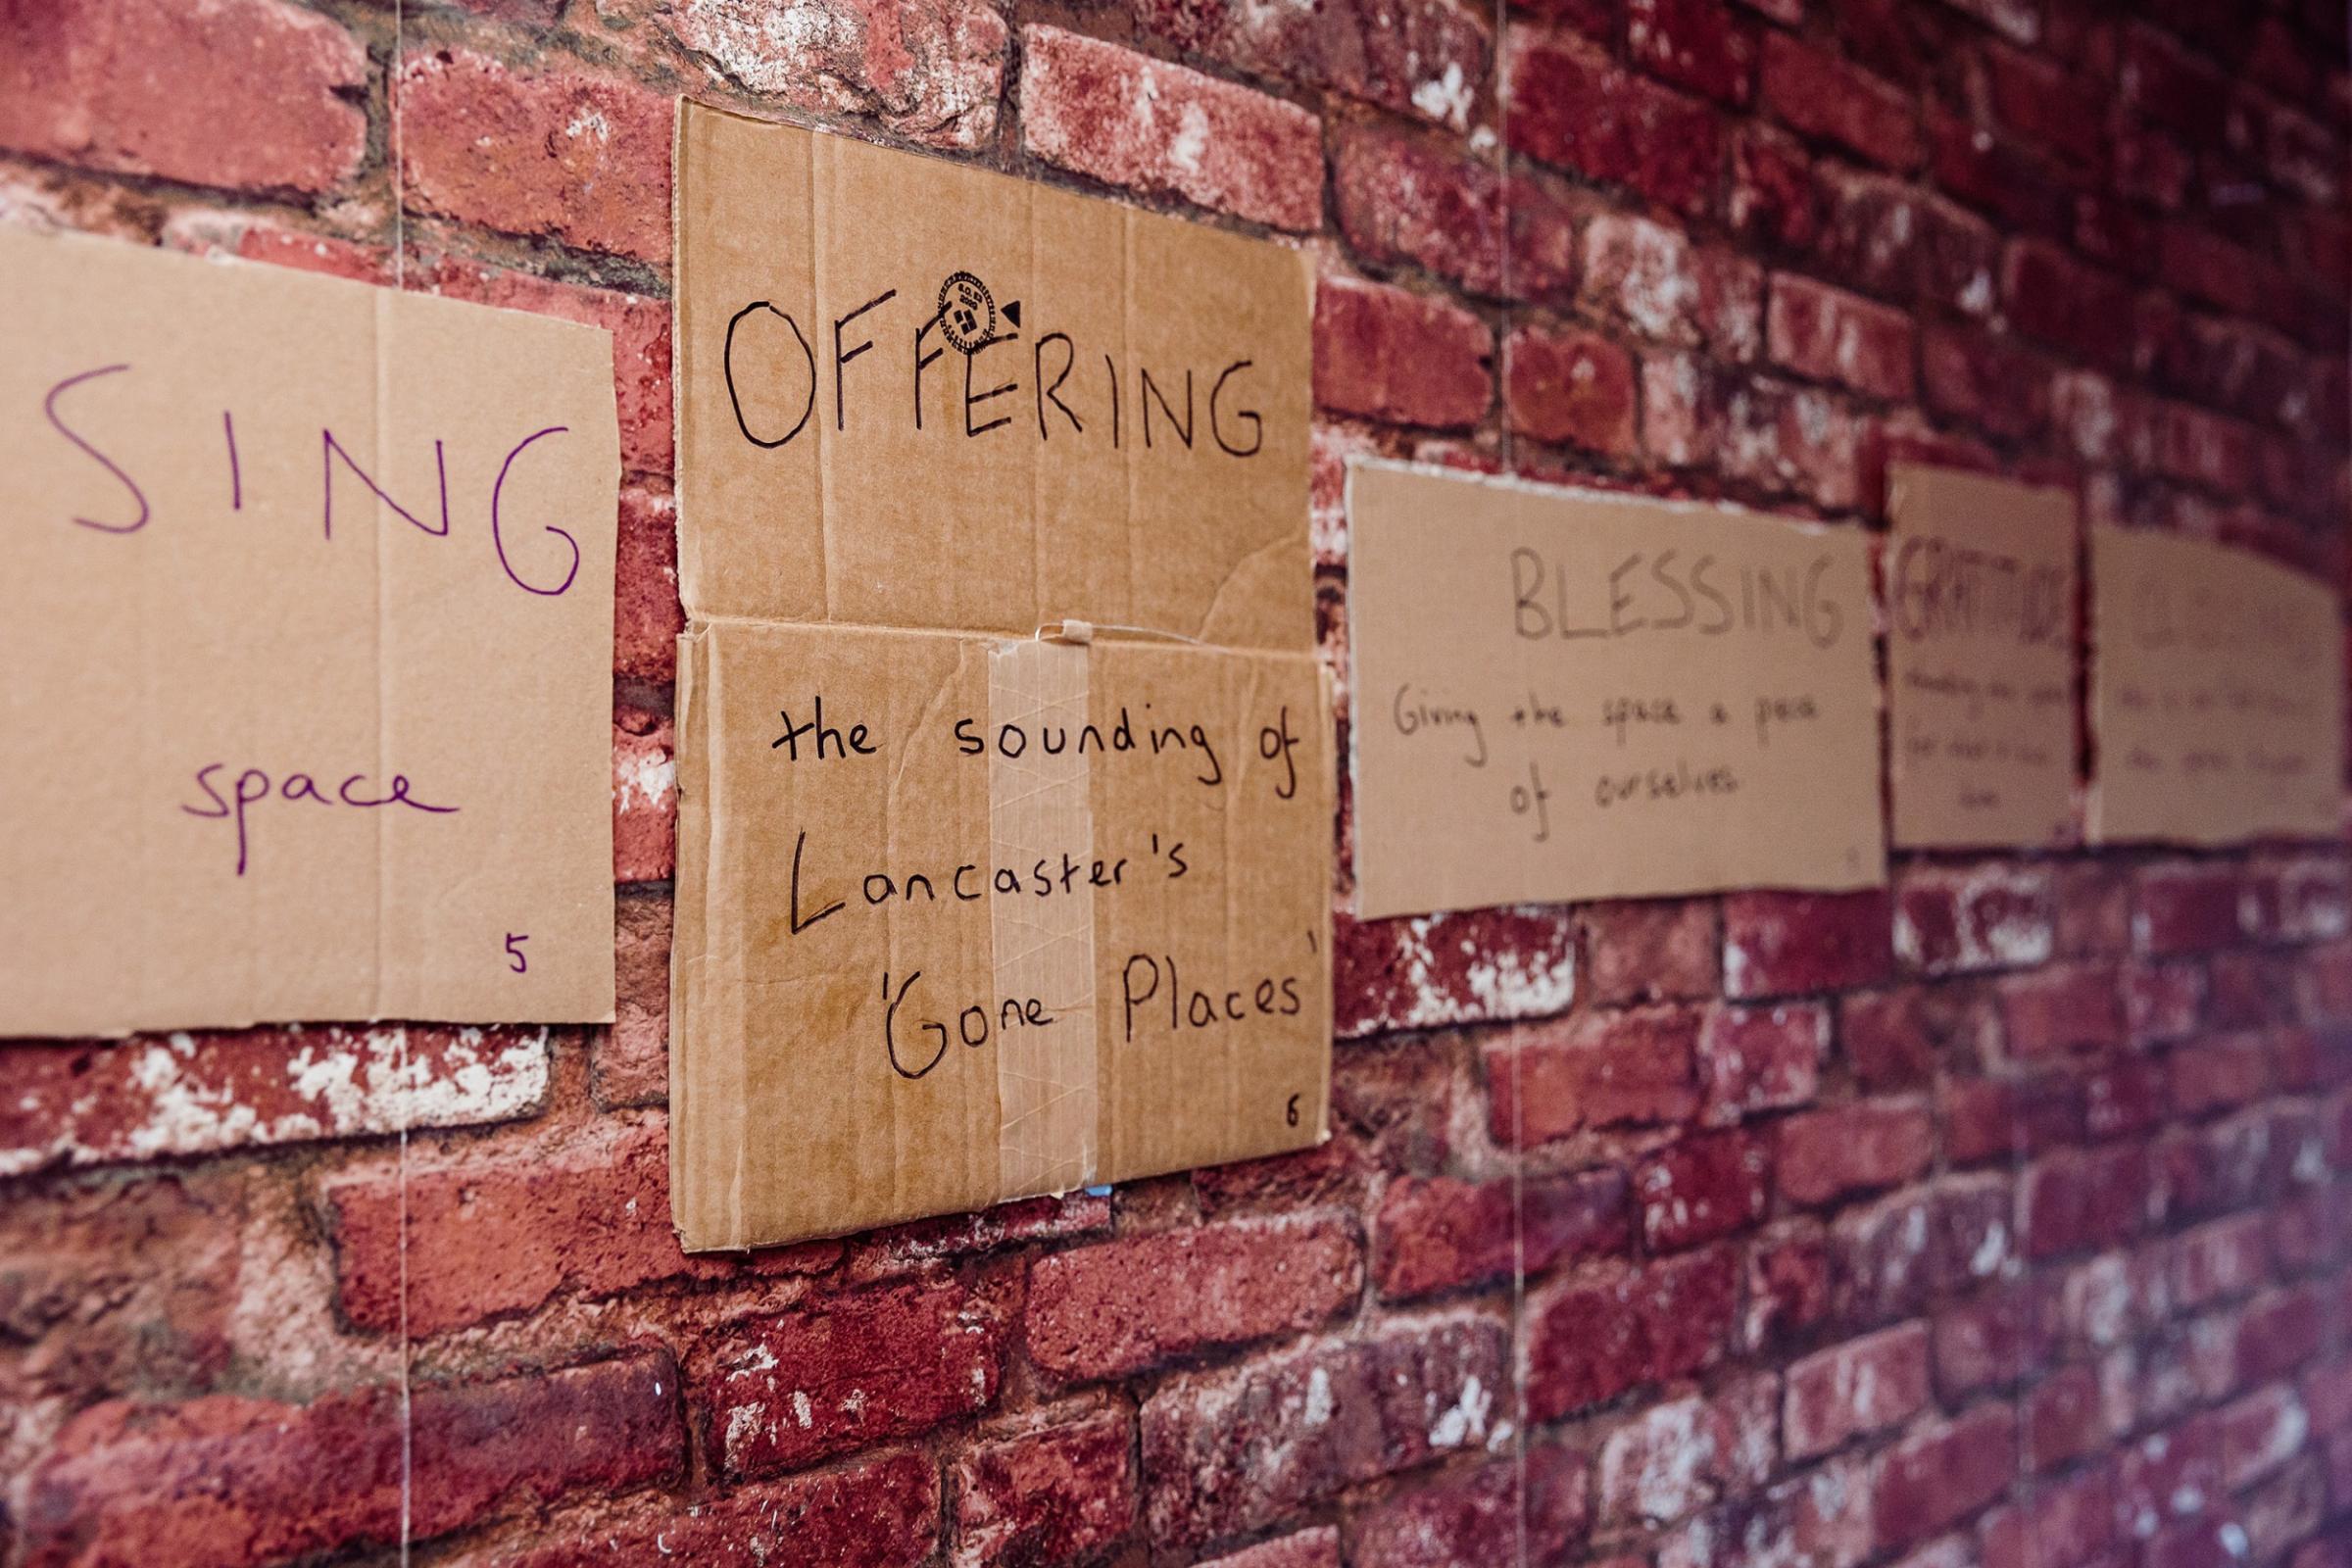 Cardboard signs on a wall that read "Sign Space. Offering. The sounding of Lancaster's Gone Places. Blessing. Giving the space a piece of ourselves"